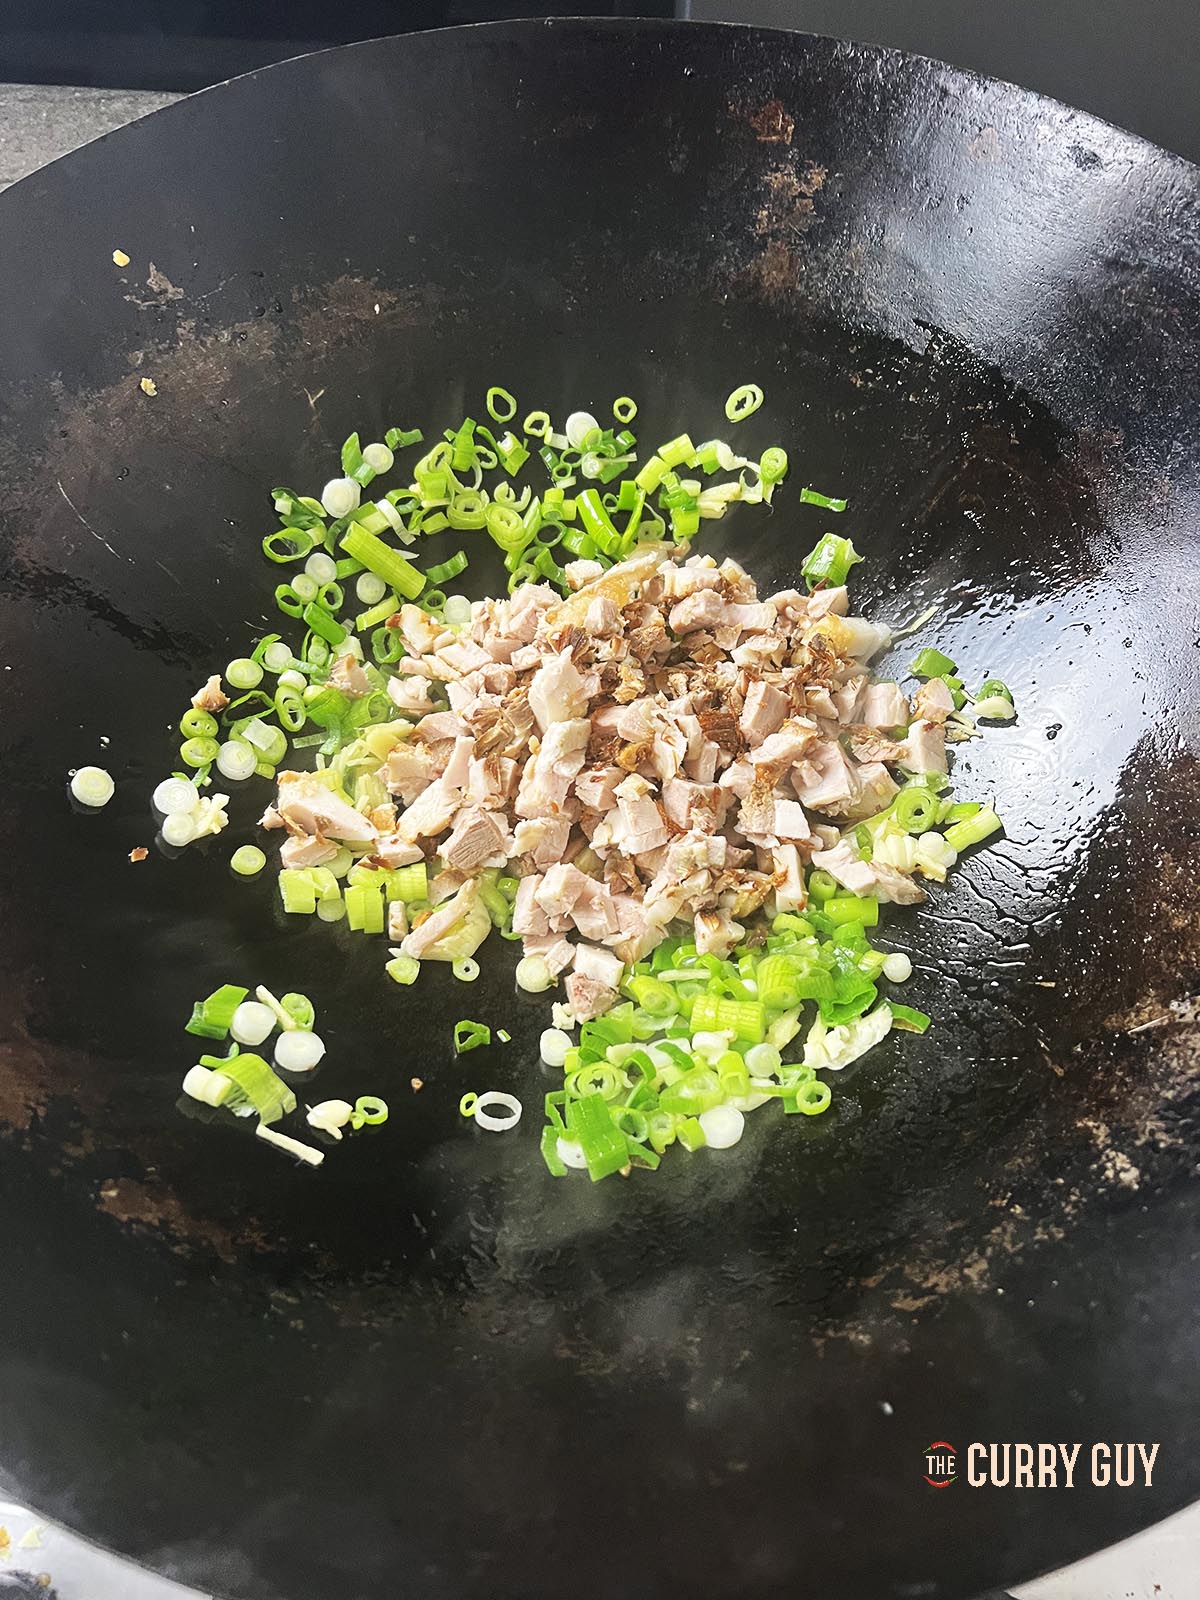 Adding and frying diced chashu pork to the wok.